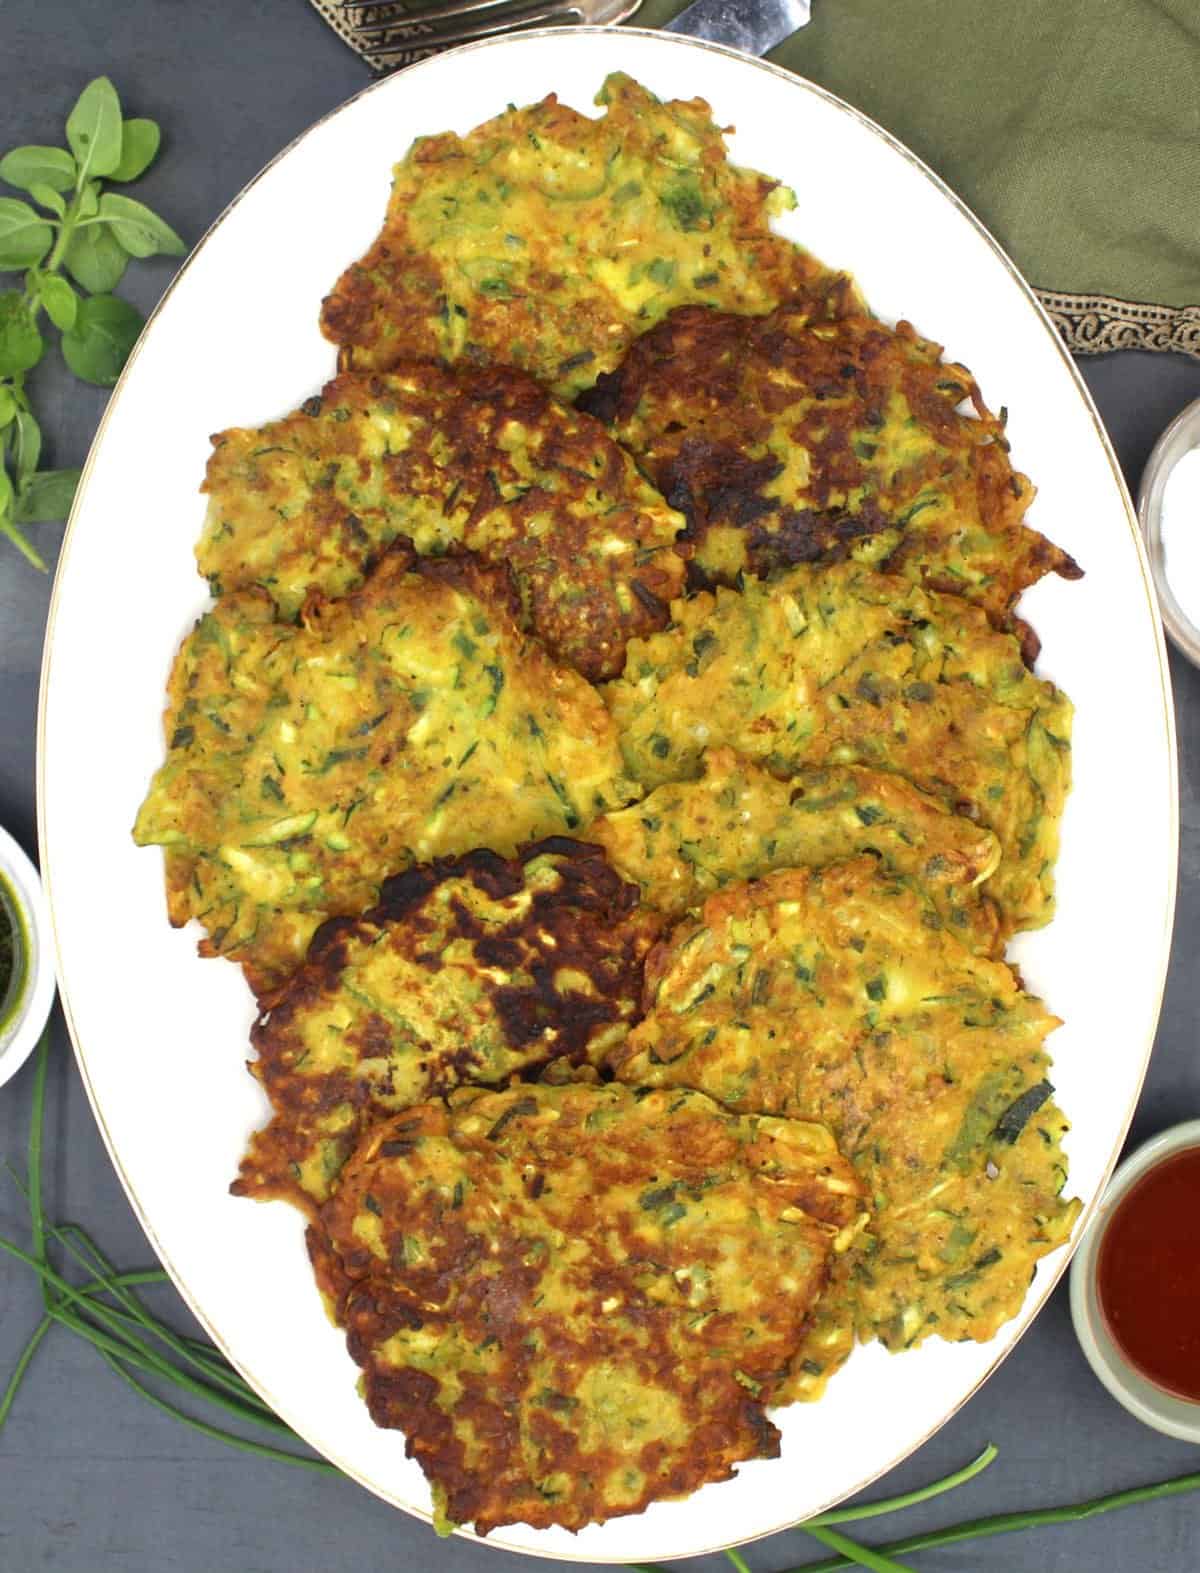 Vegan zucchini fritters on oval white platter with fork, knife, vegan sauces and herbs surrounding it.